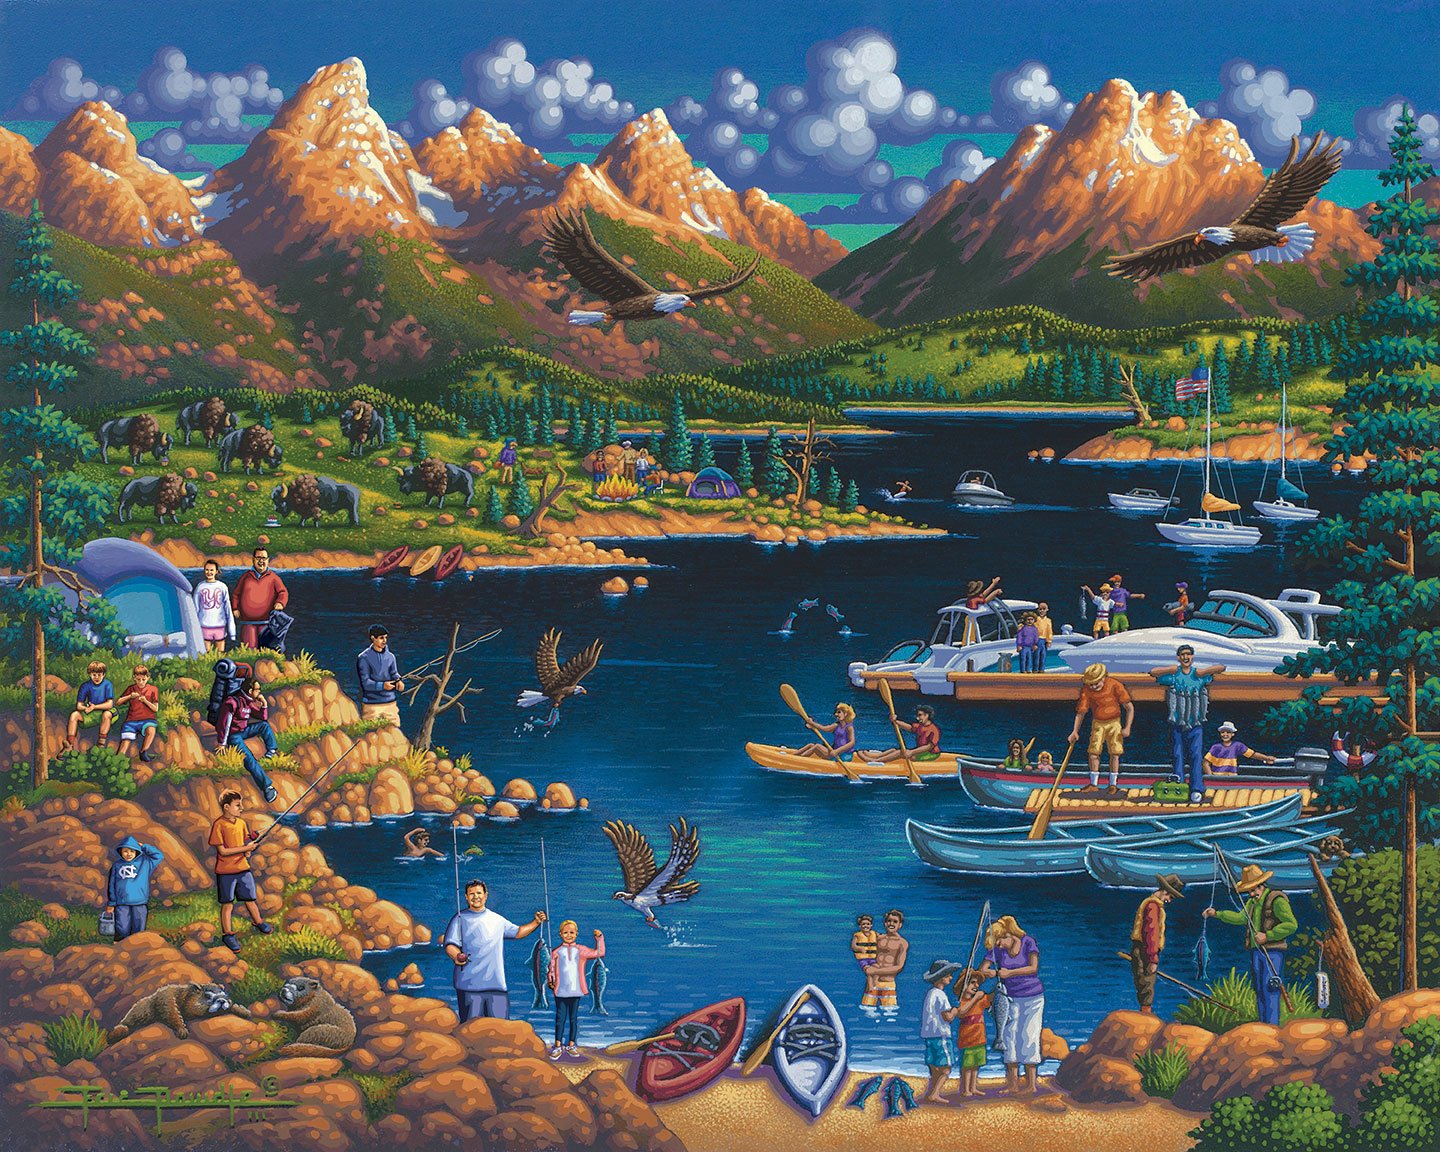 Grand Teton National Park Traditional Puzzle